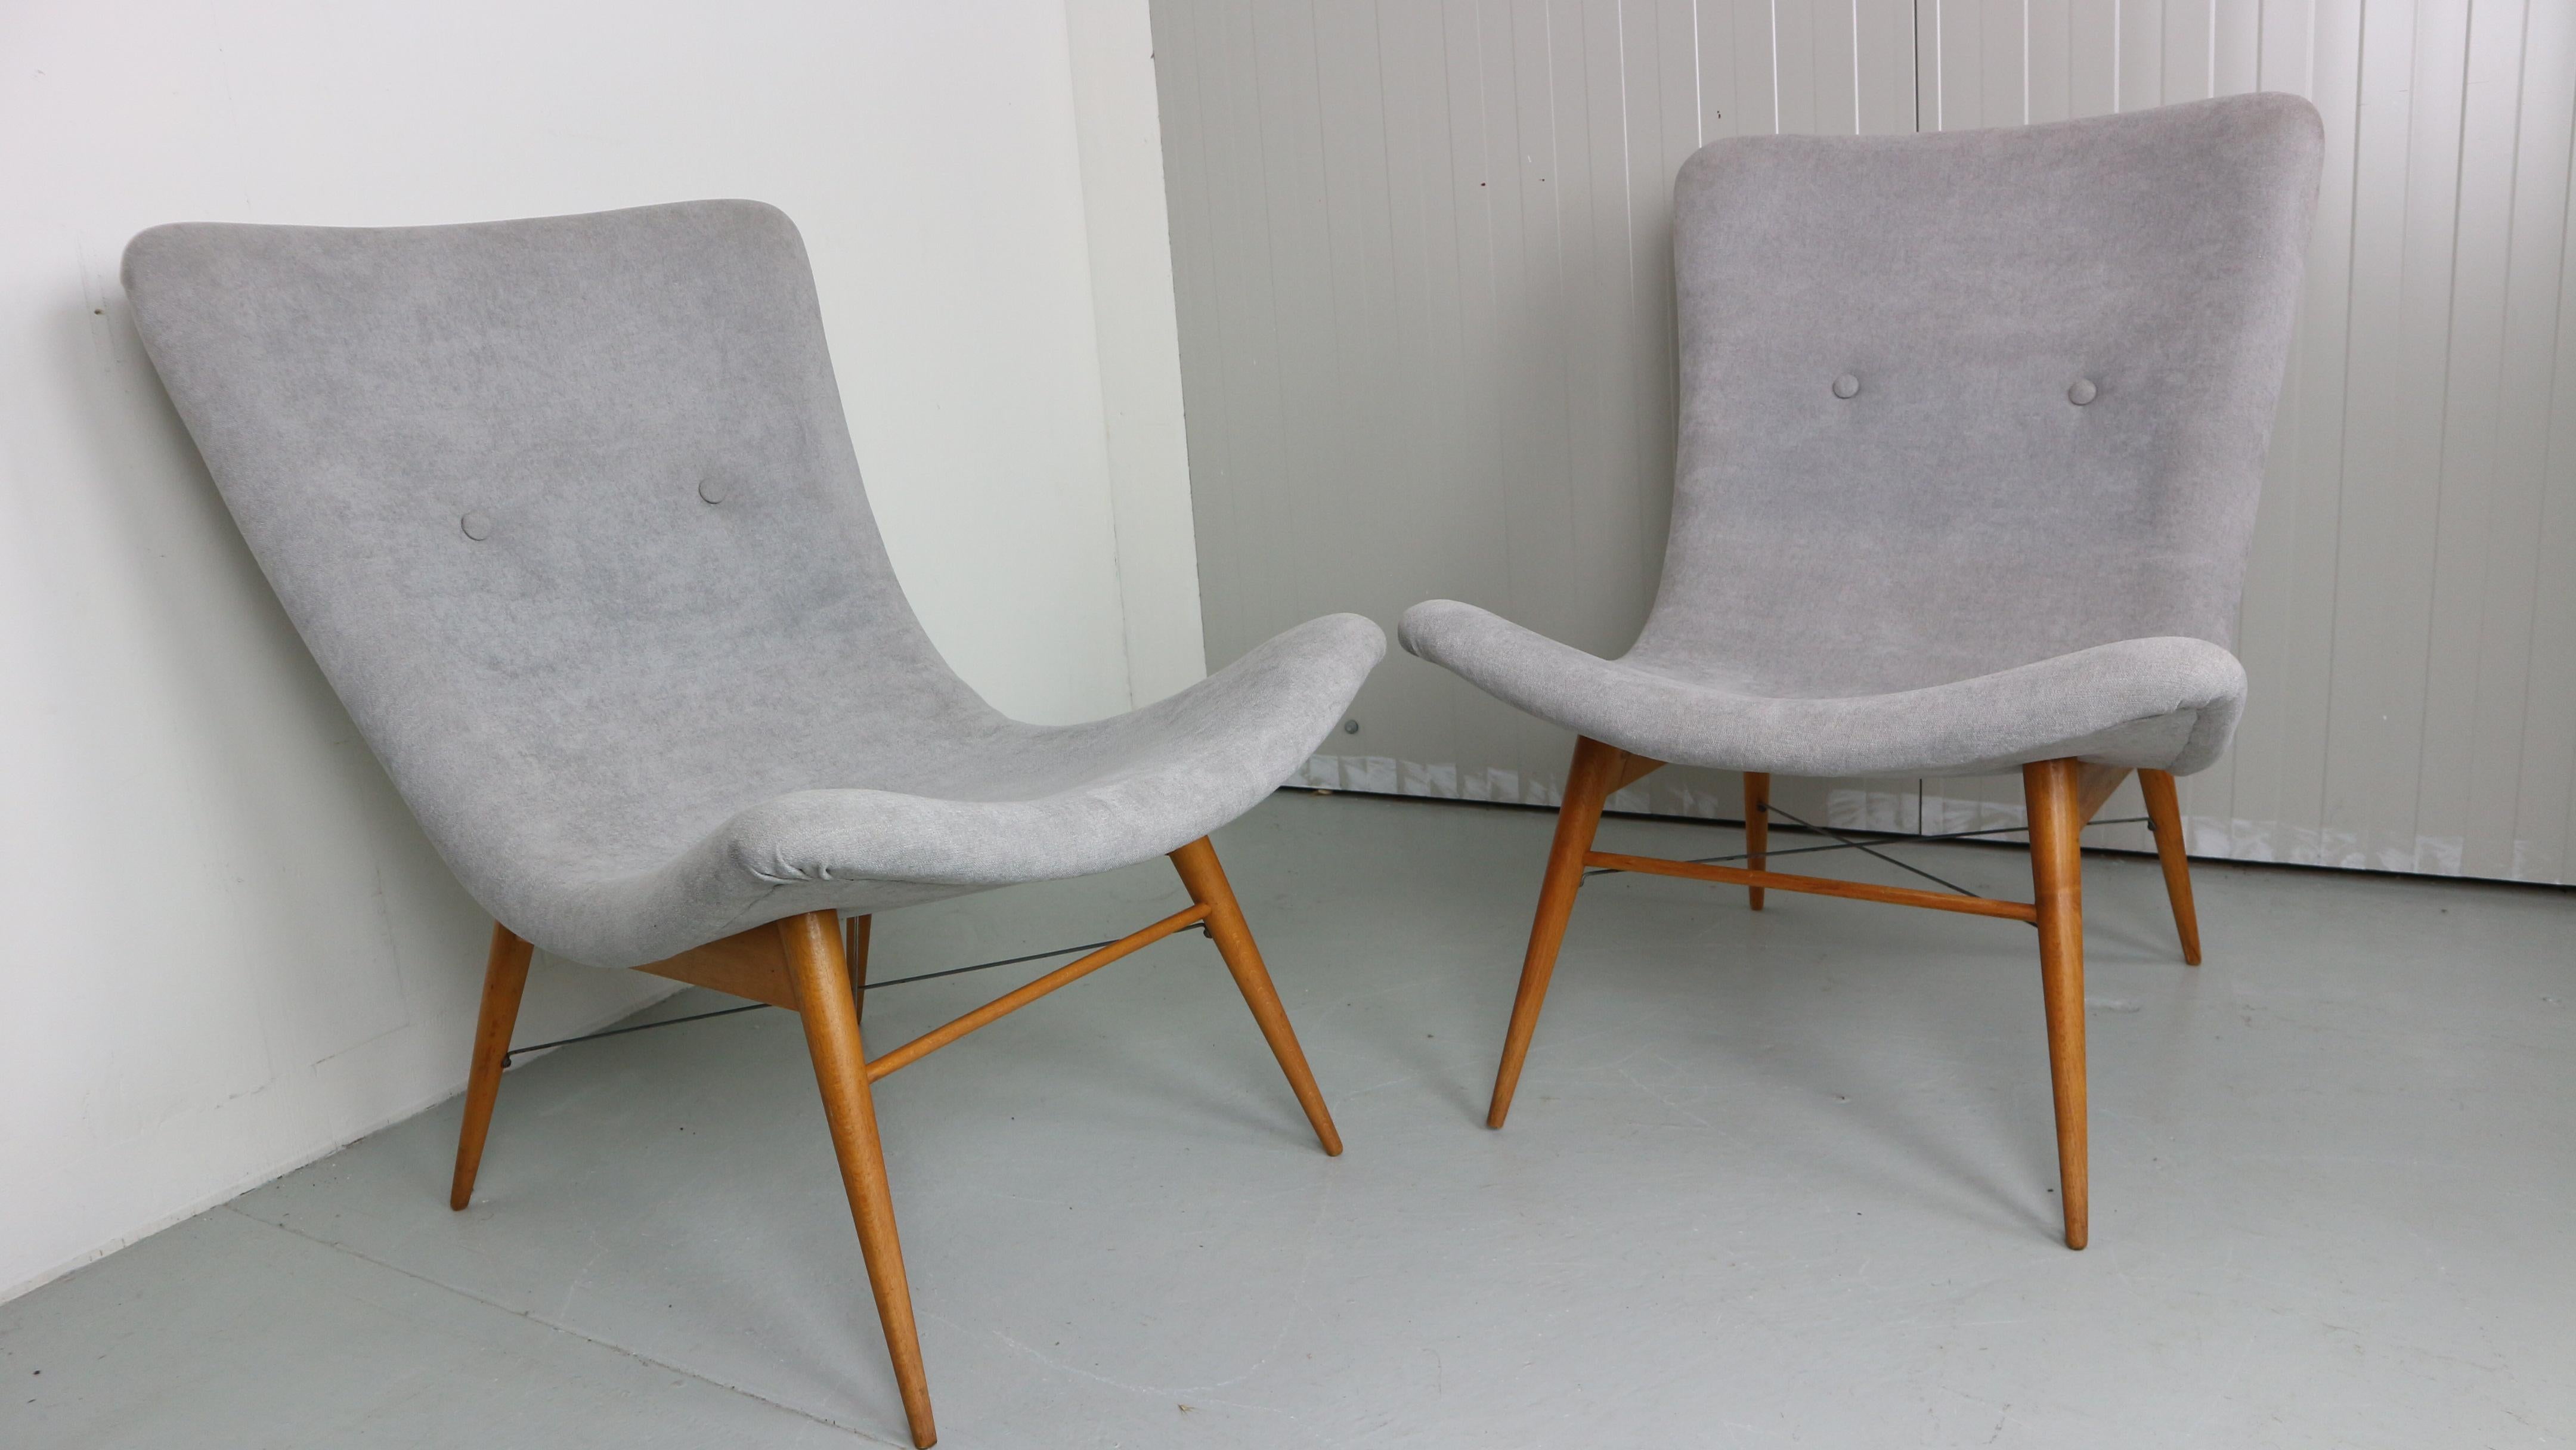 Set of two lounge chairs by Miroslav Navratil, manufactured in former Czechoslovakia by Cesky Nabytek, 1959s.
Original wooden base.
Both chairs have been newly reupholstered with light gray fabric. 